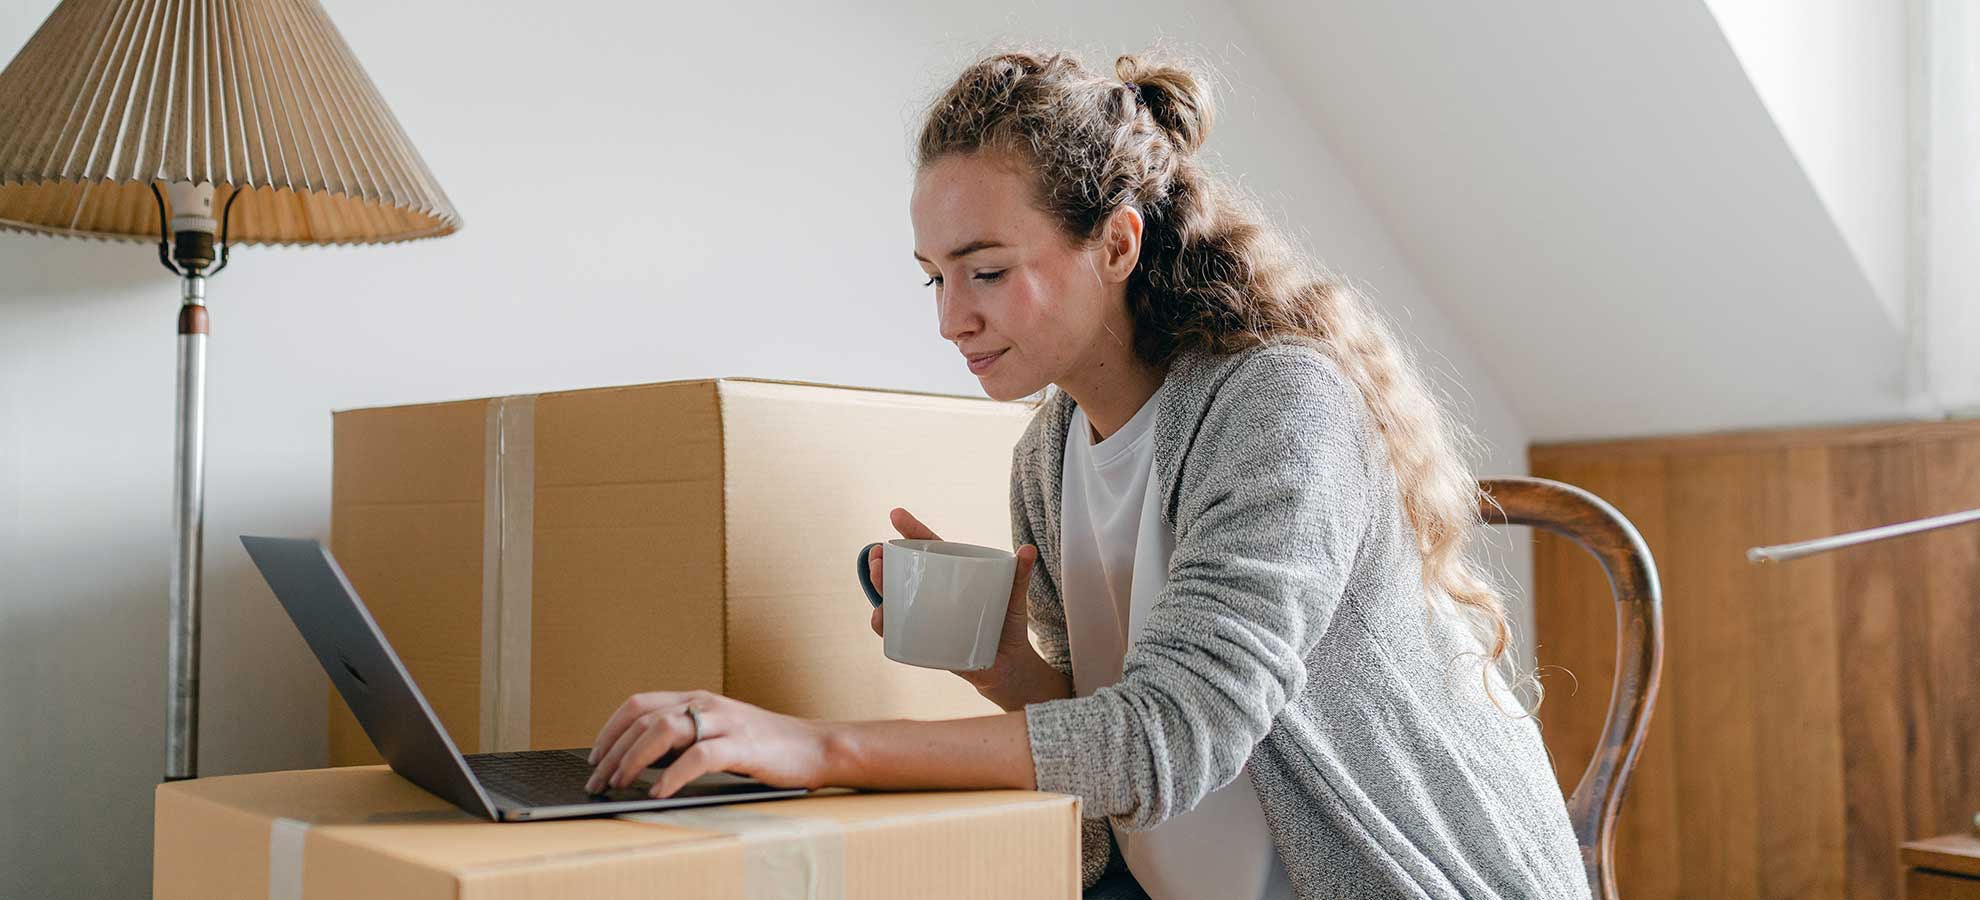 A woman sits among moving boxes typing on a laptop.